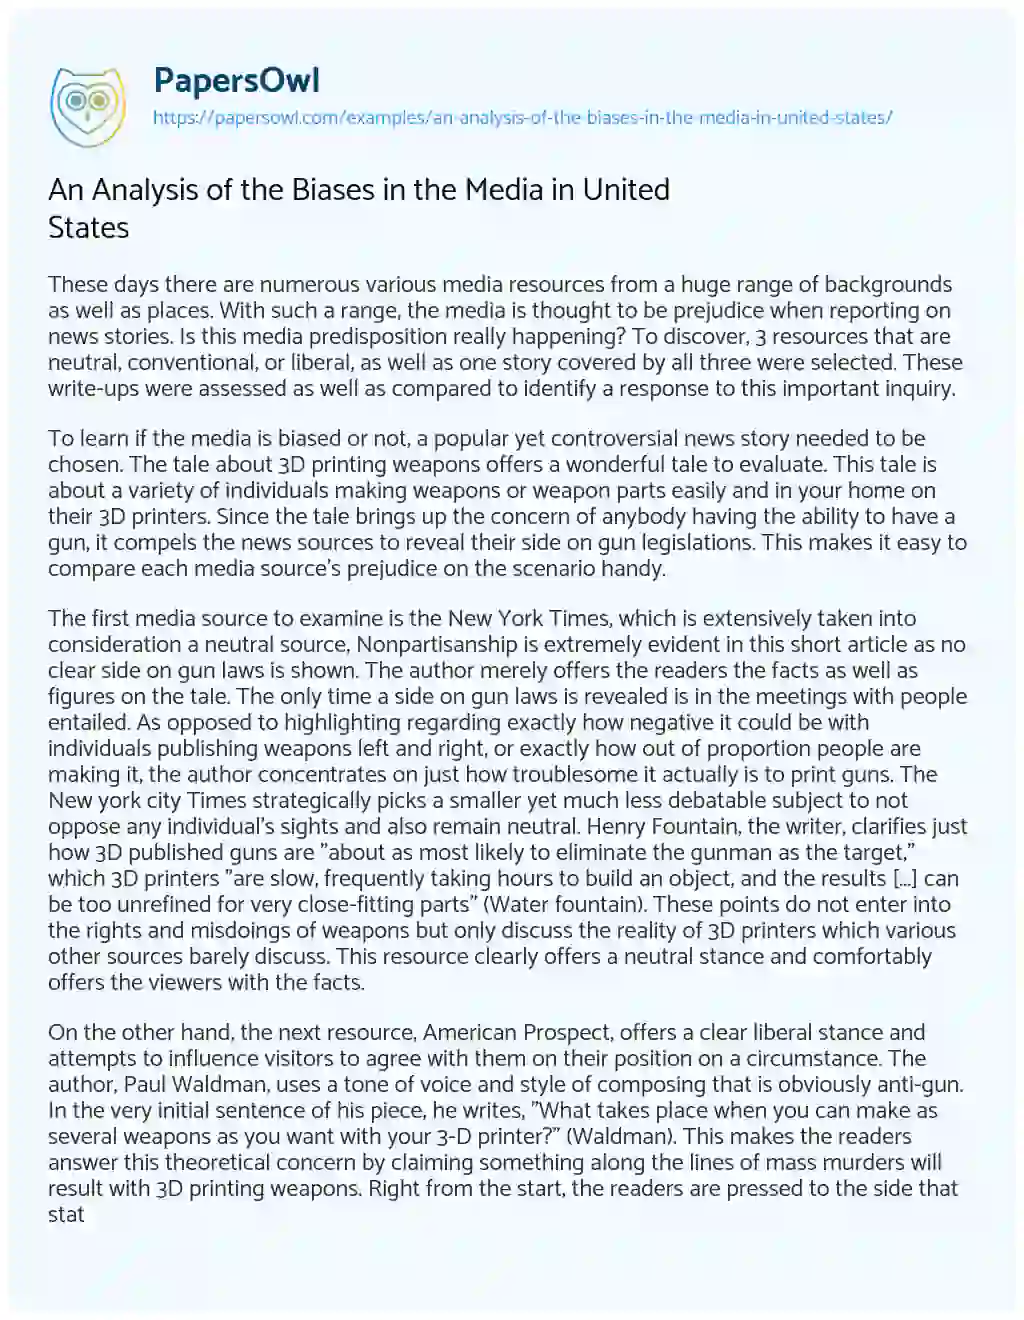 Essay on An Analysis of the Biases in the Media in United States